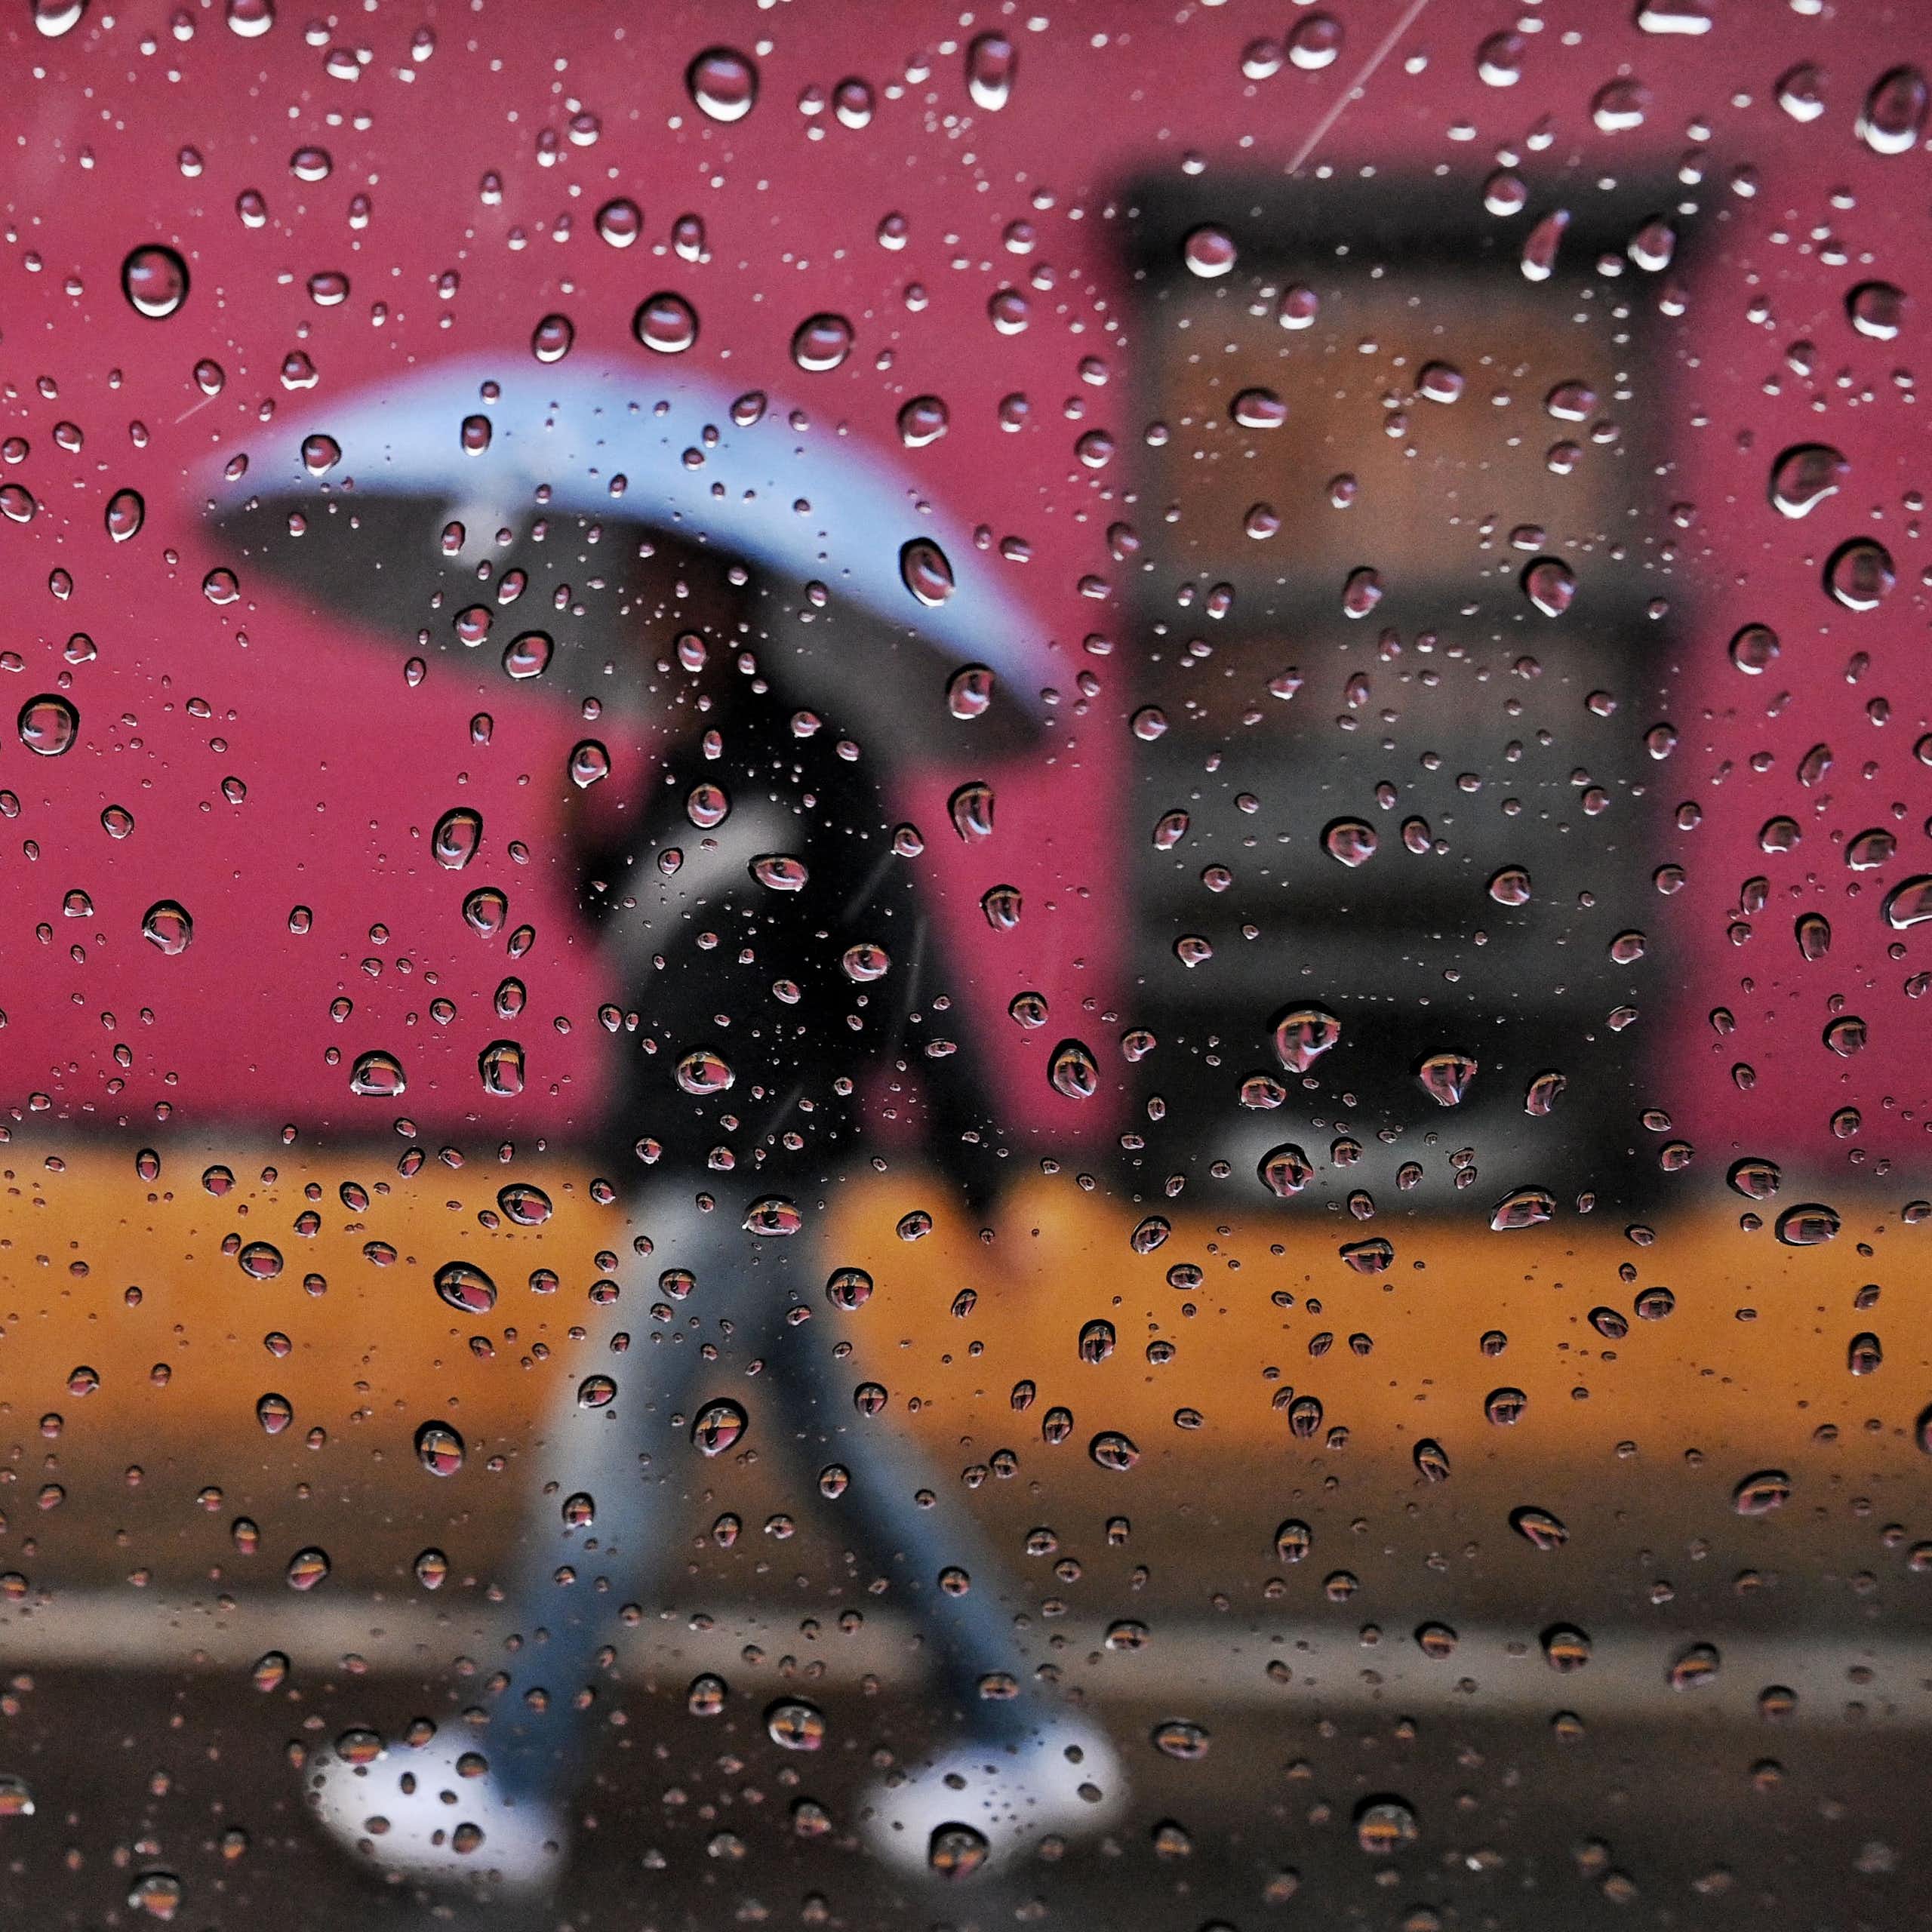 A person walks in the rain past brightly colored buildings with an umbrella. The photo is shot through a window with raindrops on the glass.